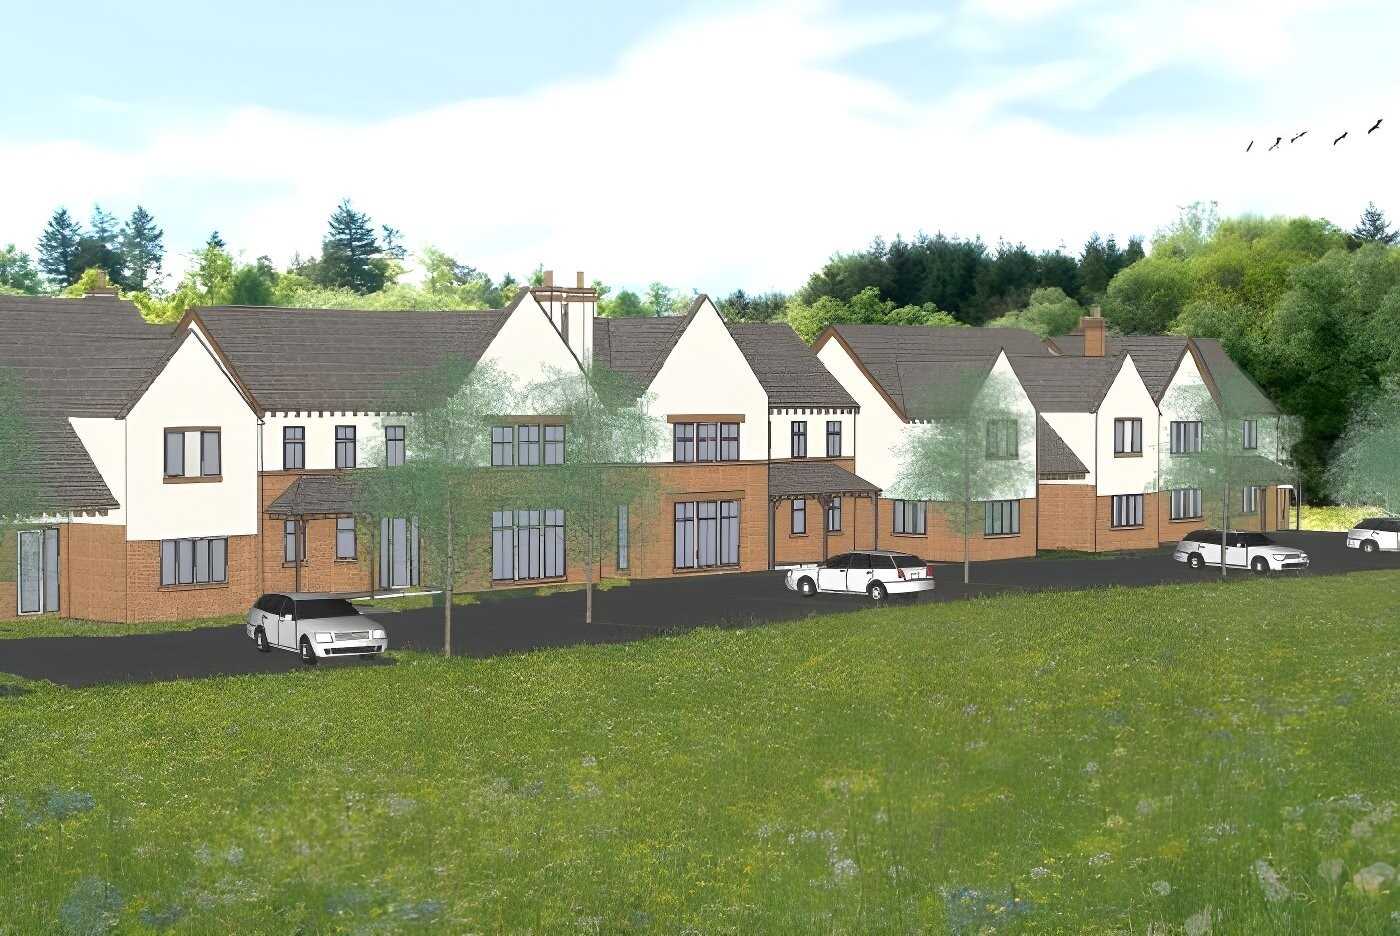 Eight Houses for Chigwell, Essex